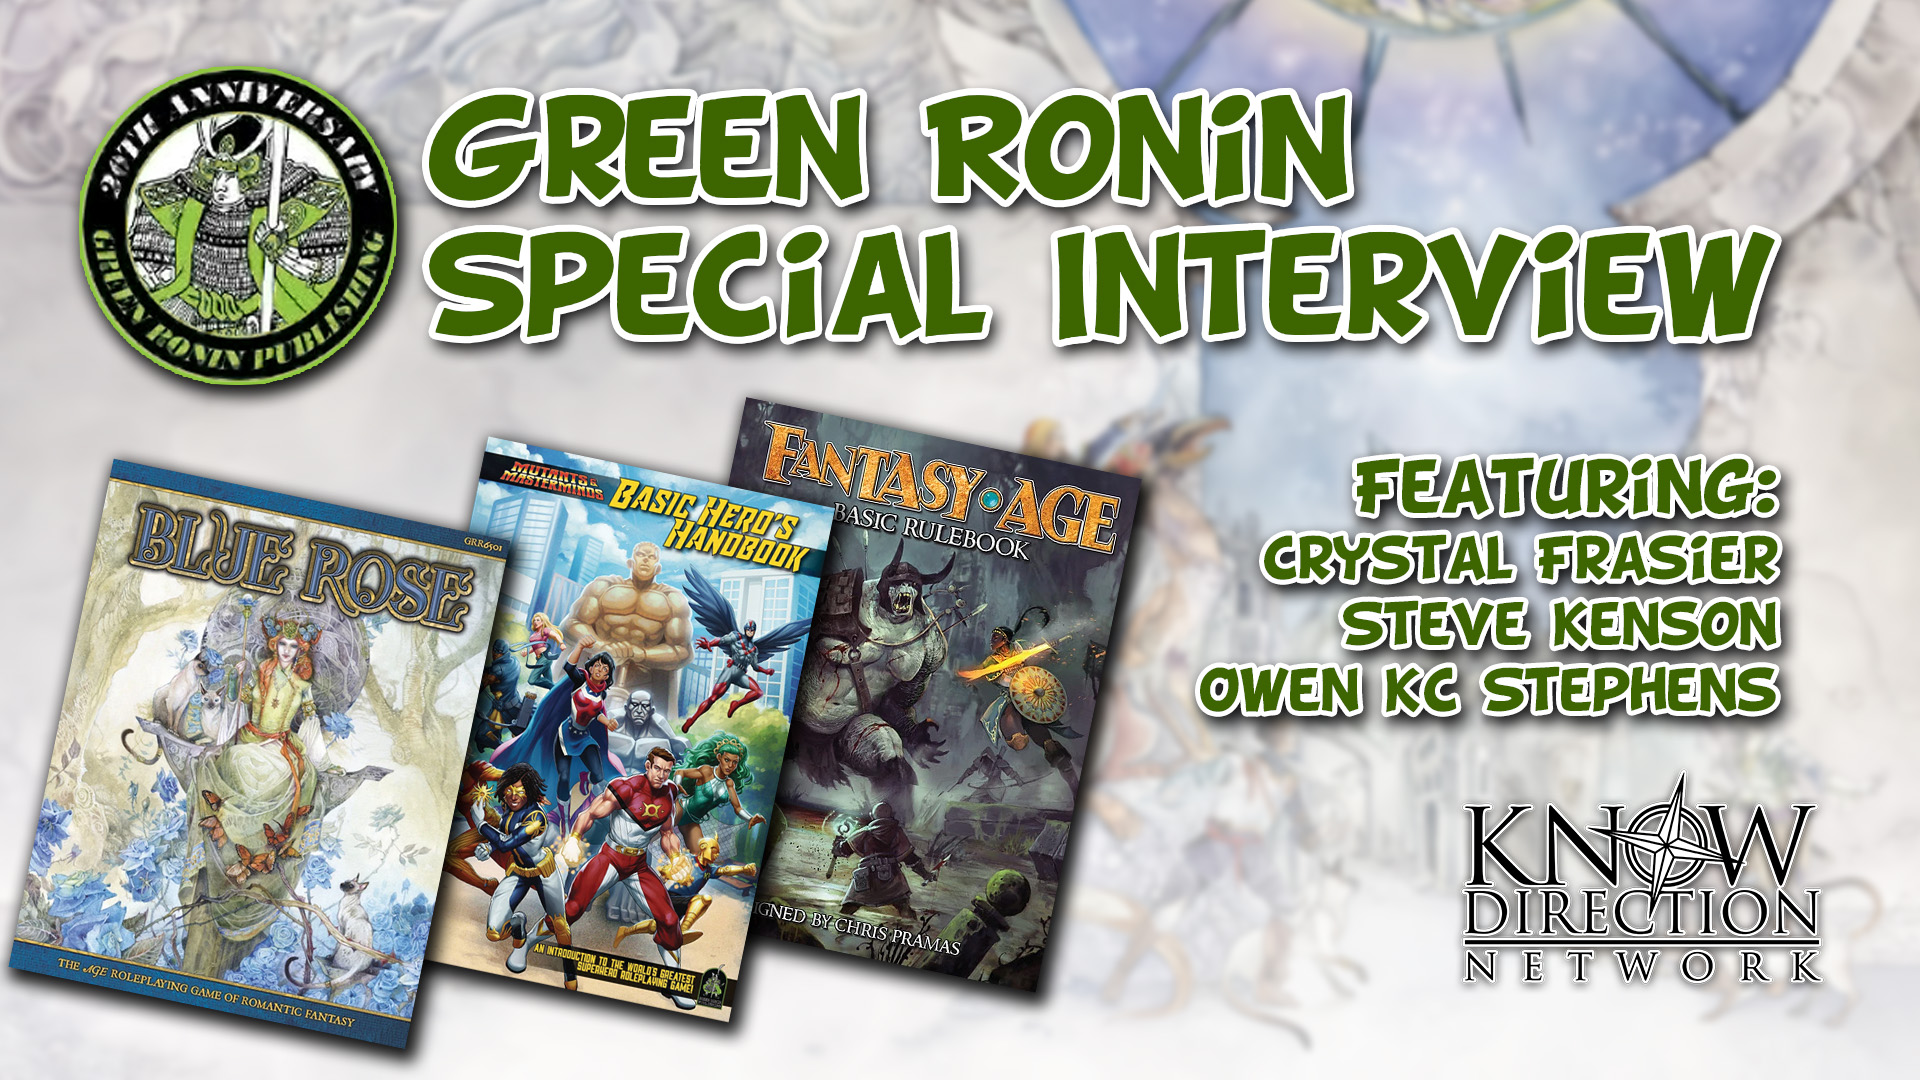 Green Ronin Special Interview with Steve Kenson, Crystal Frasier, and Owen KC Stephens